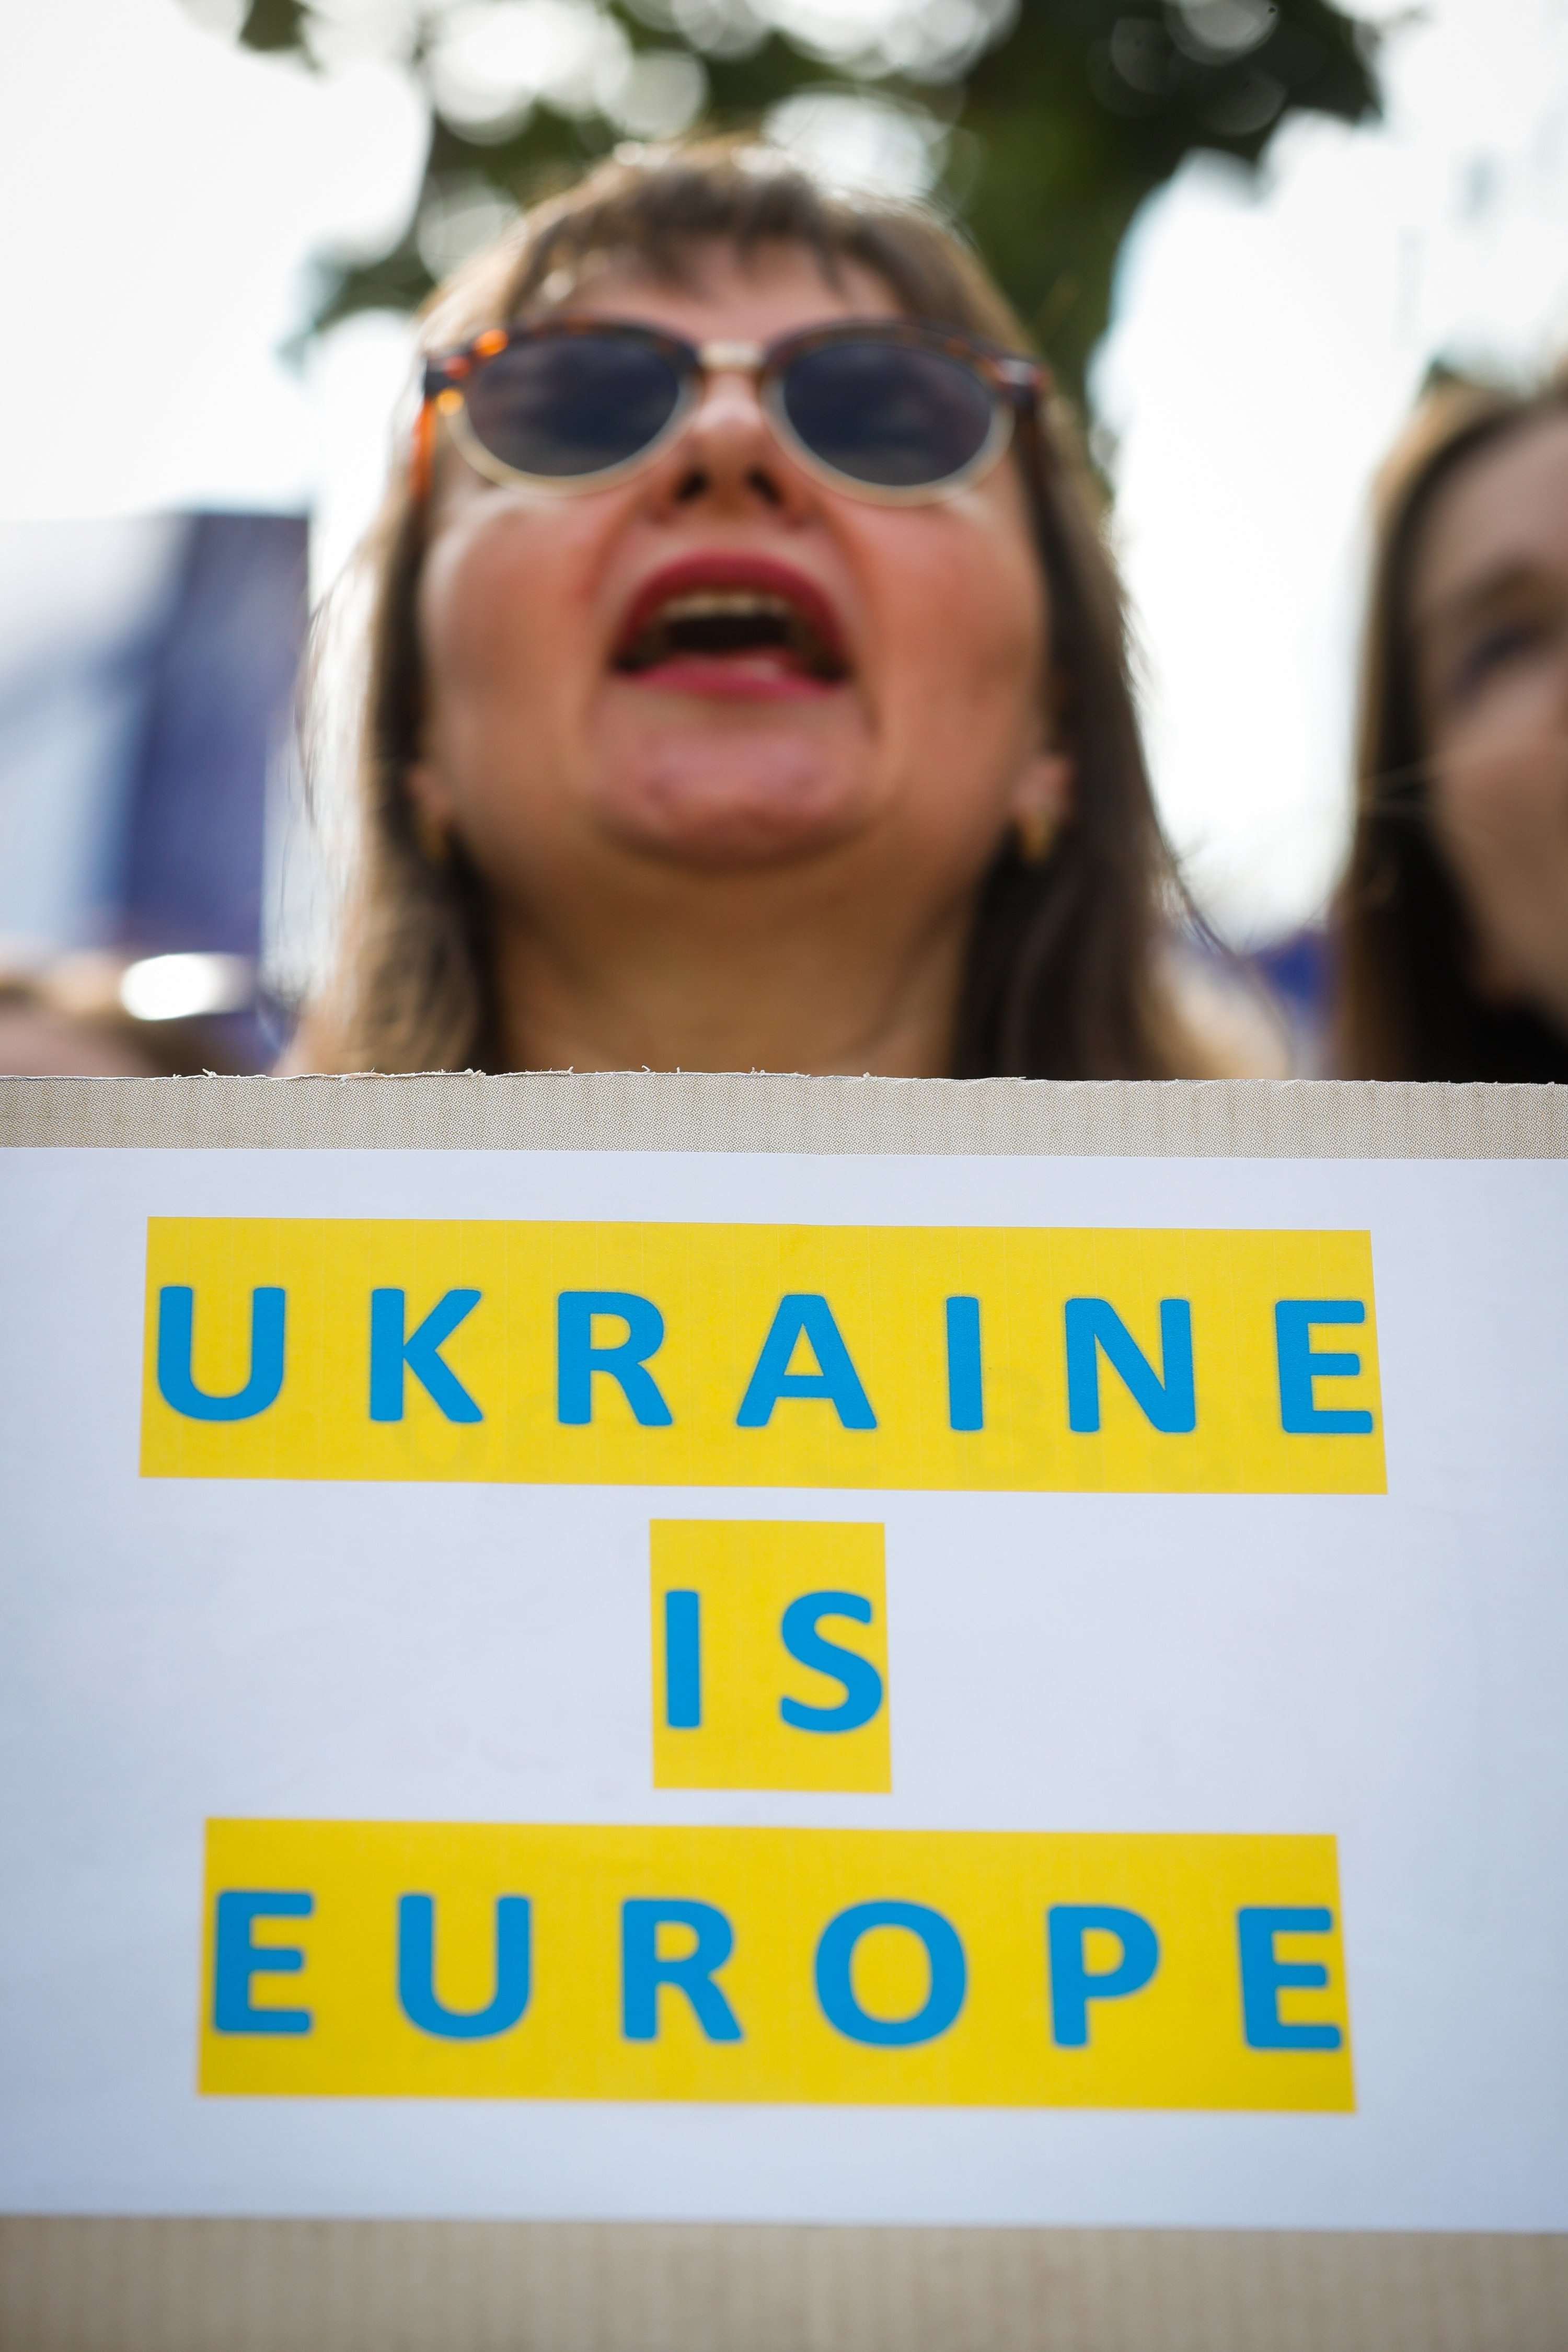 A protester demonstrates in front of the European Council to demand EU accession for Ukraine, Brussels, Belgium, June 23, 2022. (EPA Photo)